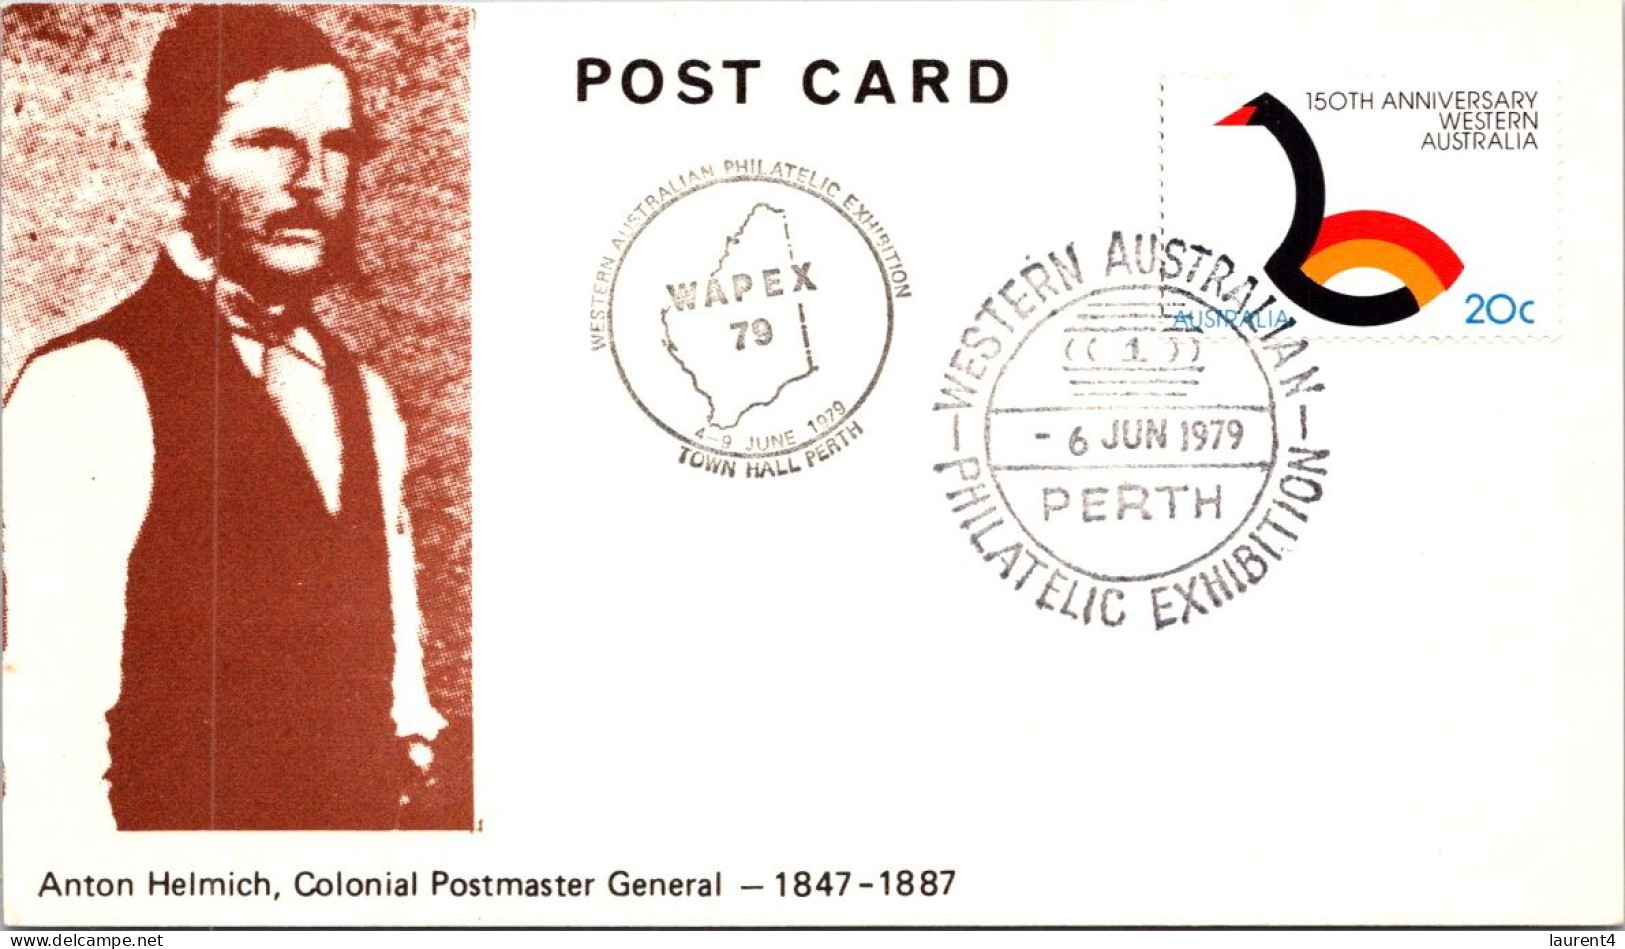 26-4-2024 (4 Y 6) Centenary Of The First Postcard Issued In Western Australia (6-6-1879) 6-6-1979 (1 Card) - Postal Services